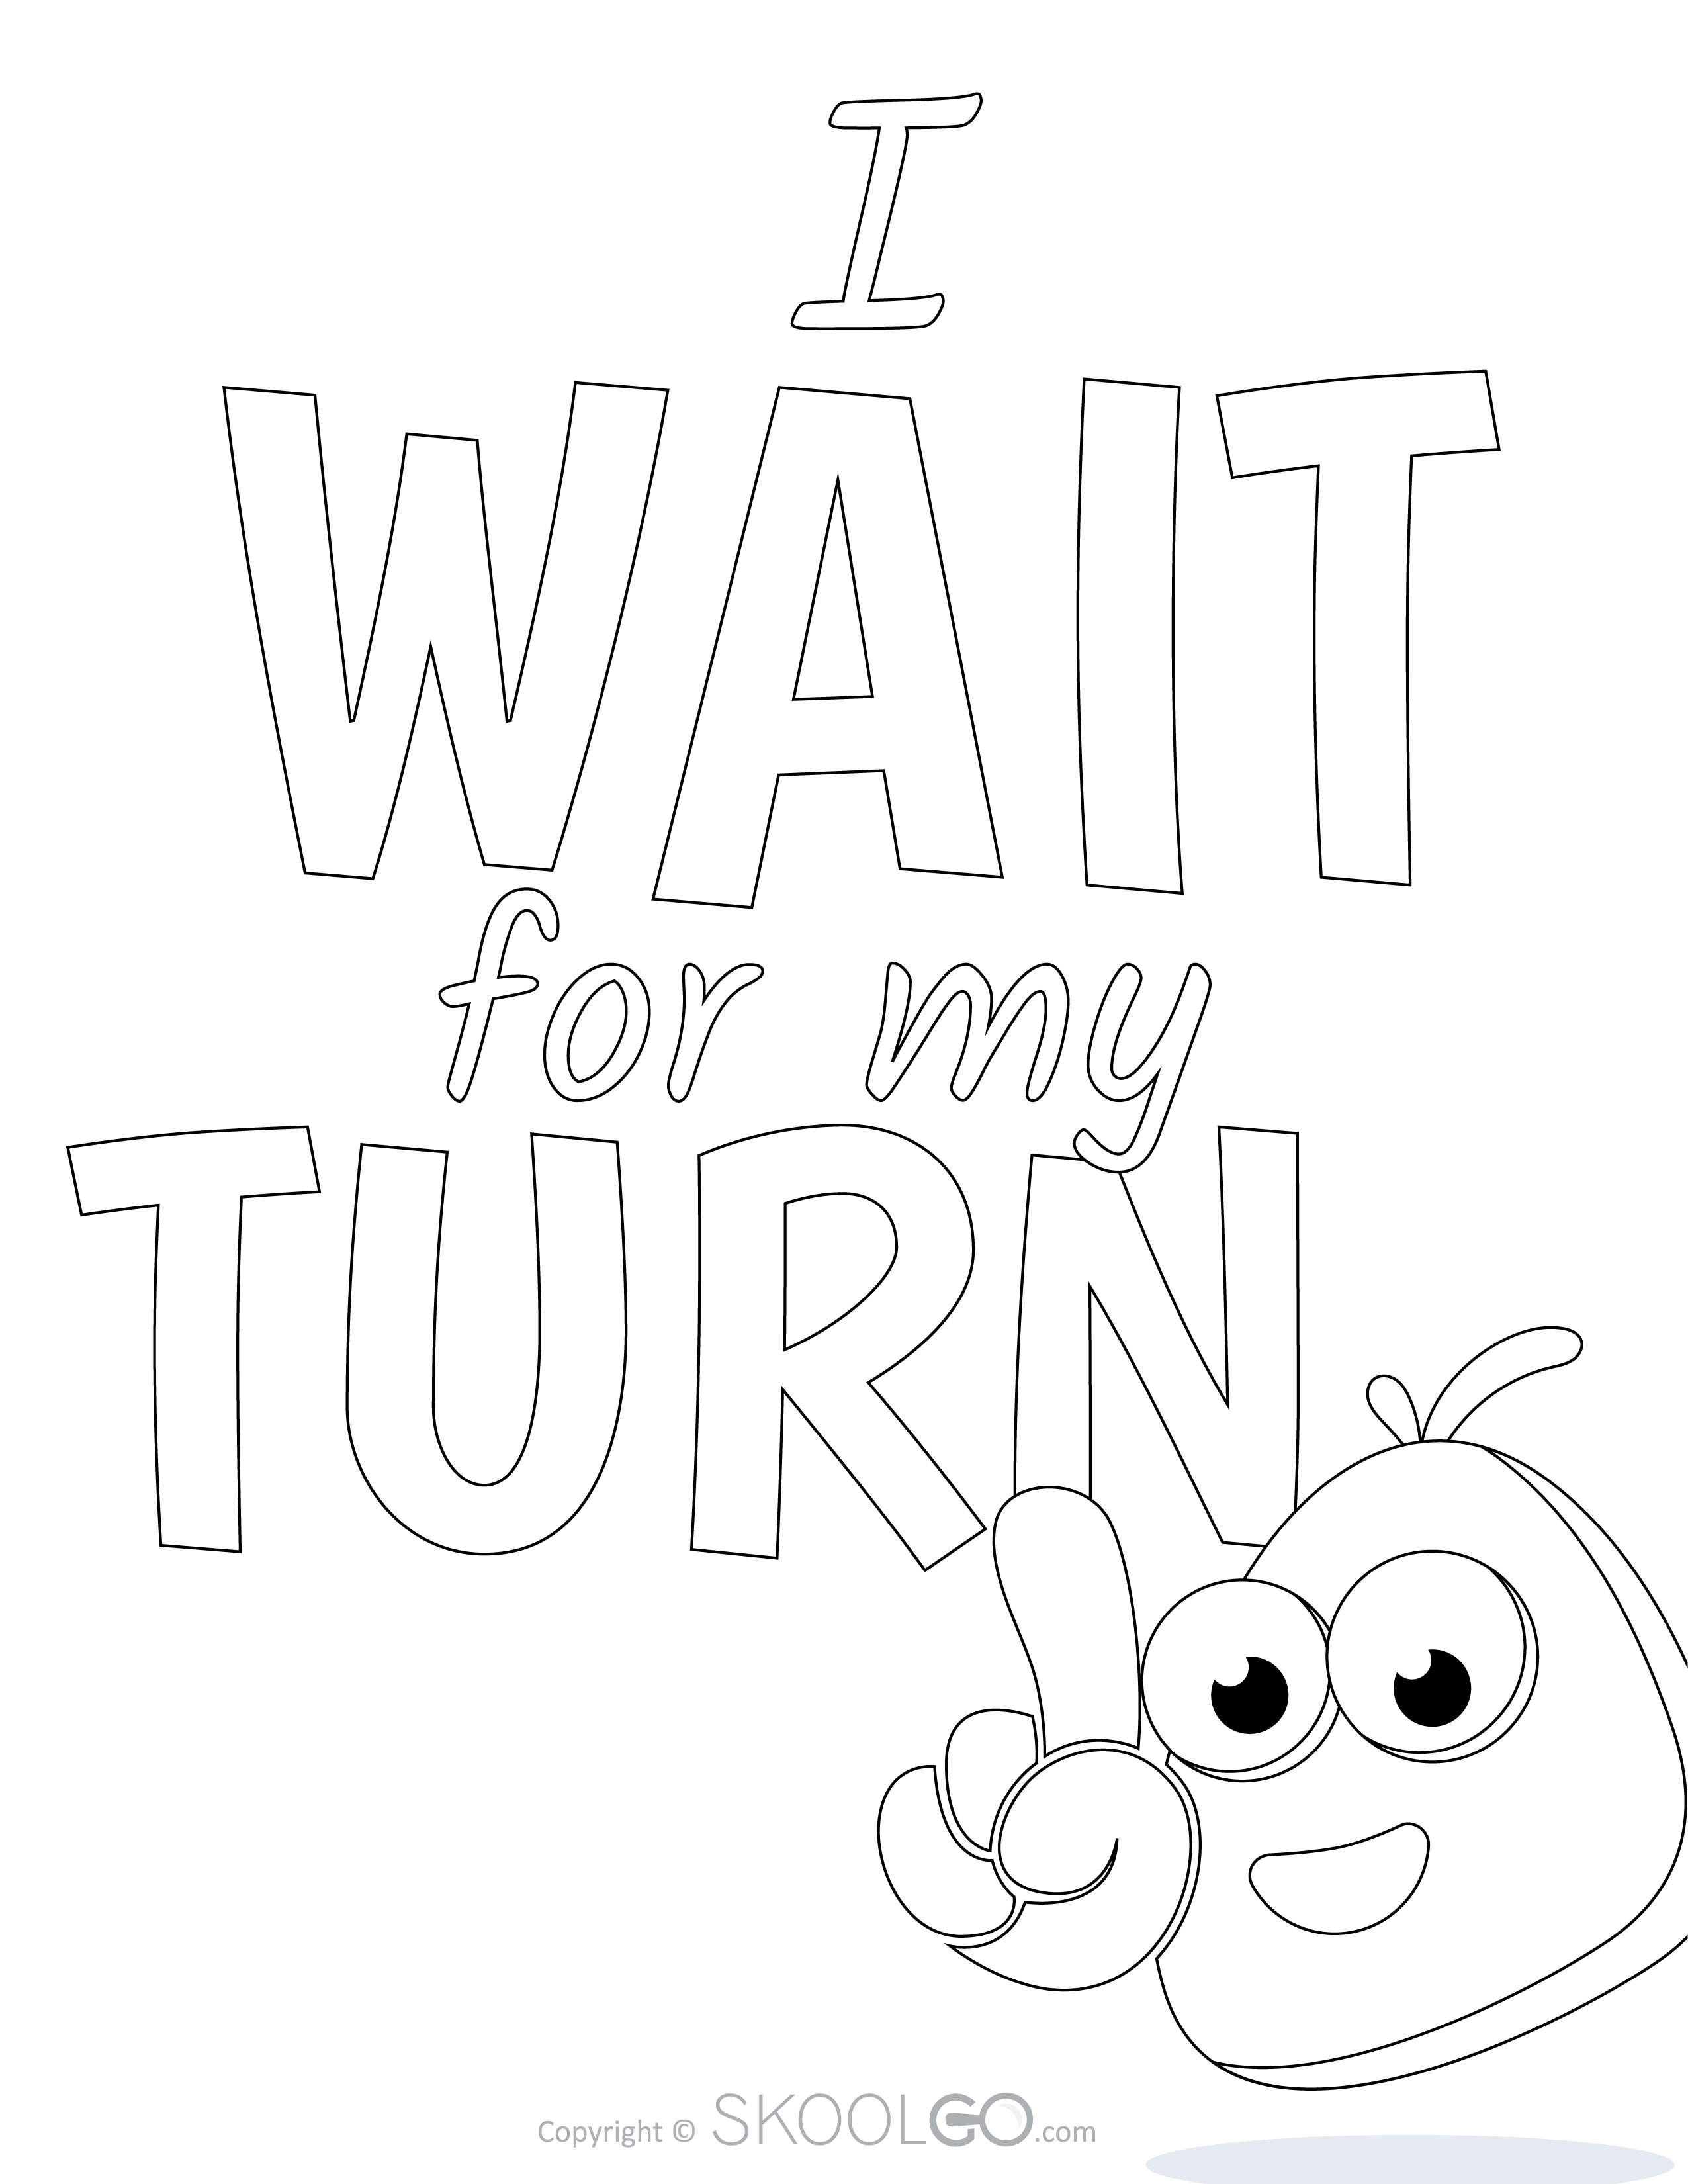 I Wait For My Turn - Free Classroom Poster Coloring Version